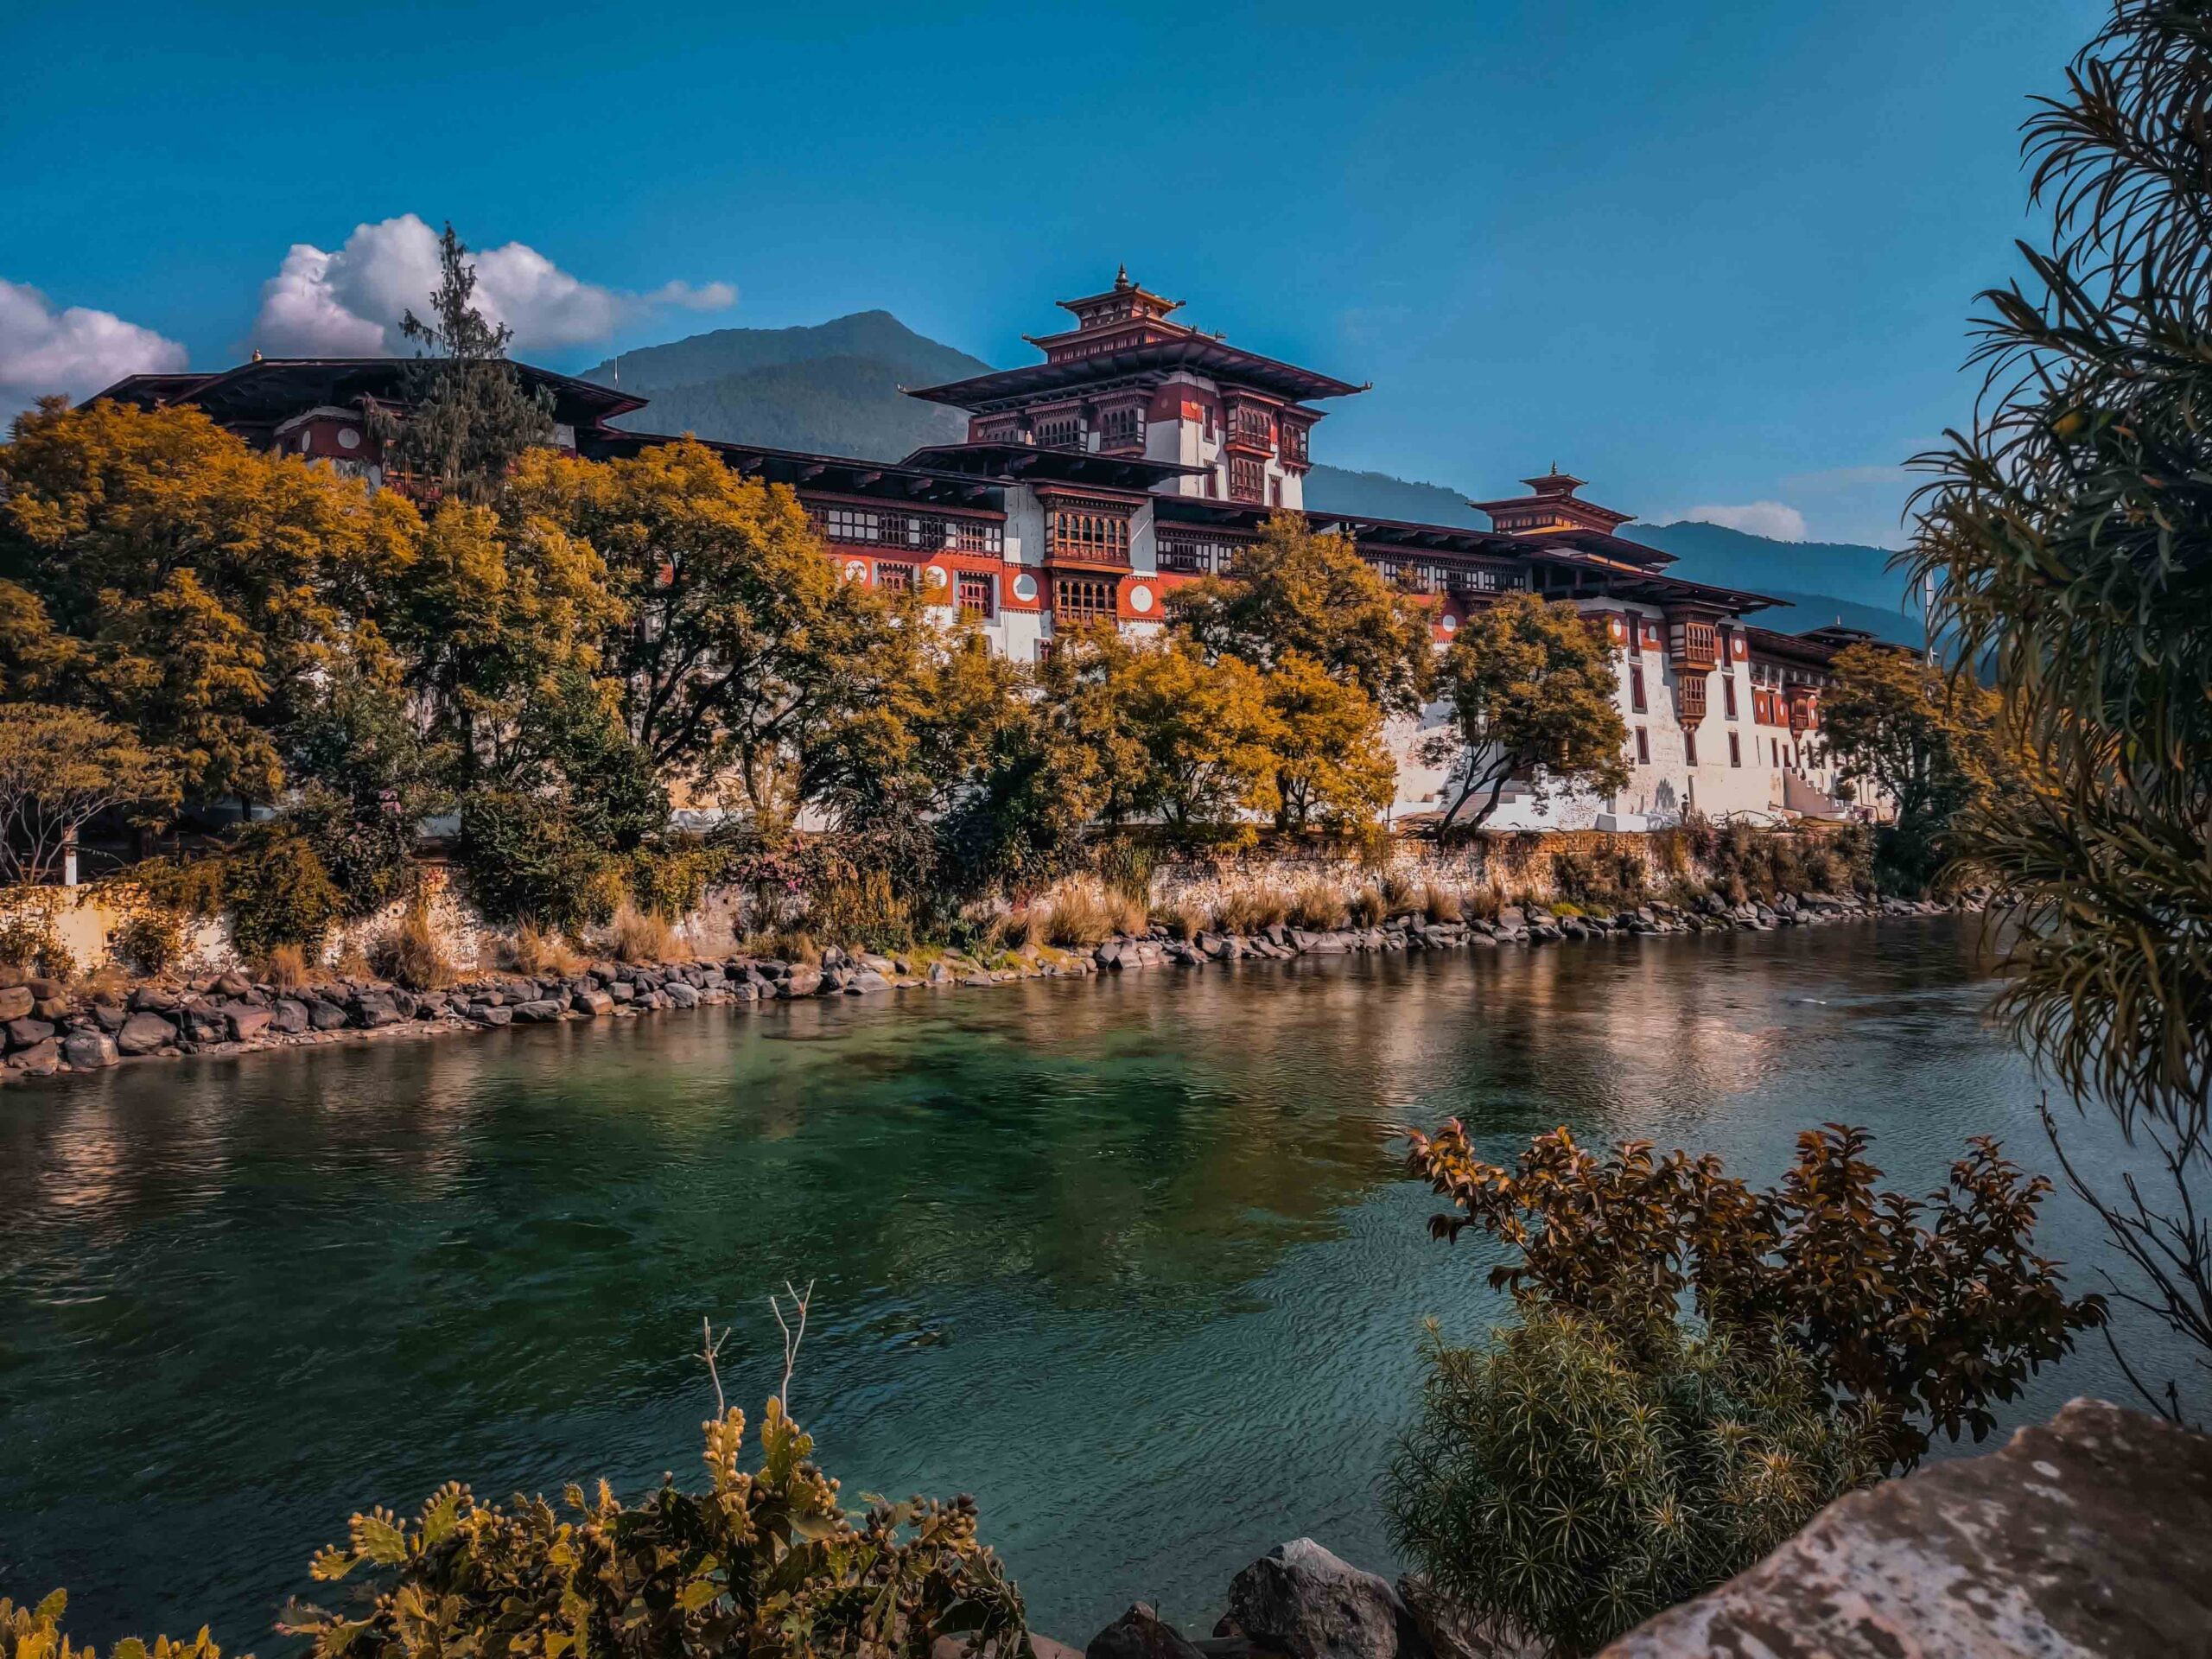 Best Things to Do in Punakha,Best Time to Visit Punakha,How to Get to Punakha,Where to Eat in Punakha,Where to Stay in Punakha,Divine Punakha Festival,Enjoy a Meal at the Dochula Resort Restaurant,Talo Monastery,White Water Rafting in Punakha,Punakha Suspension Bridge,Things to do in Punakha